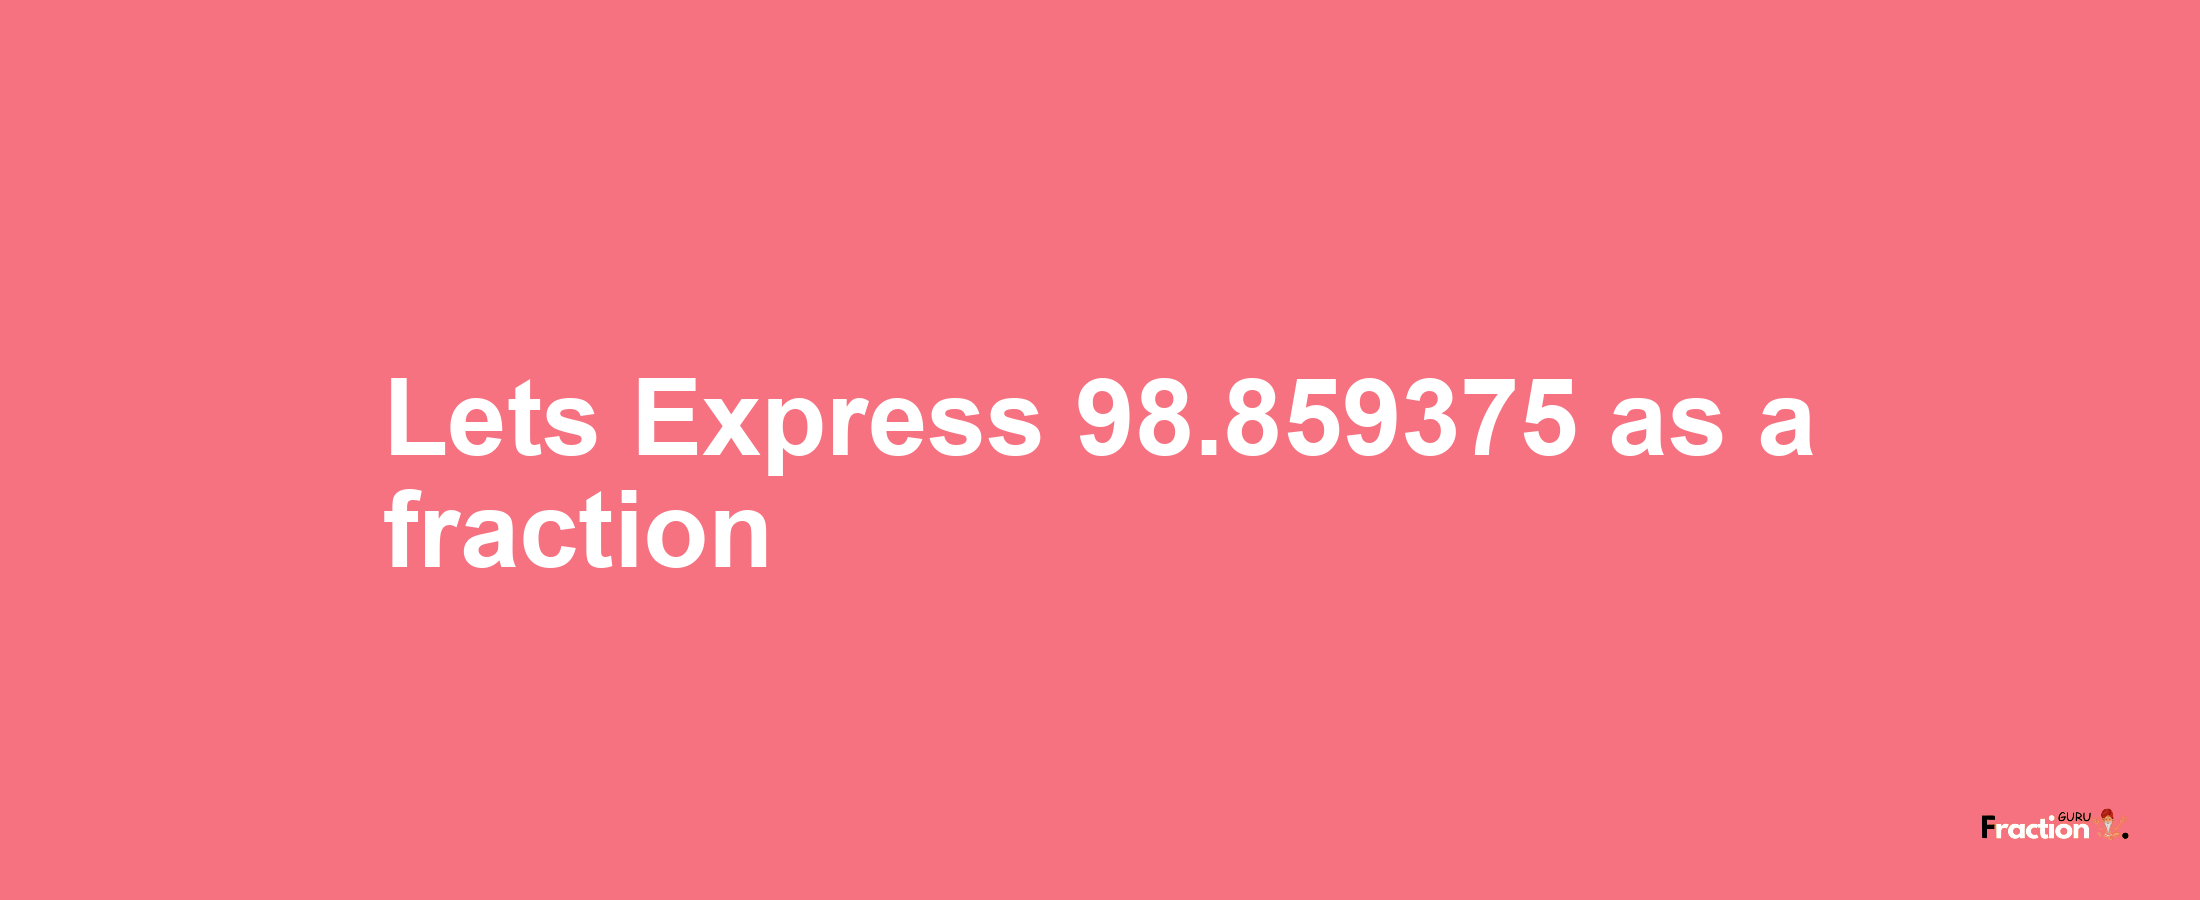 Lets Express 98.859375 as afraction